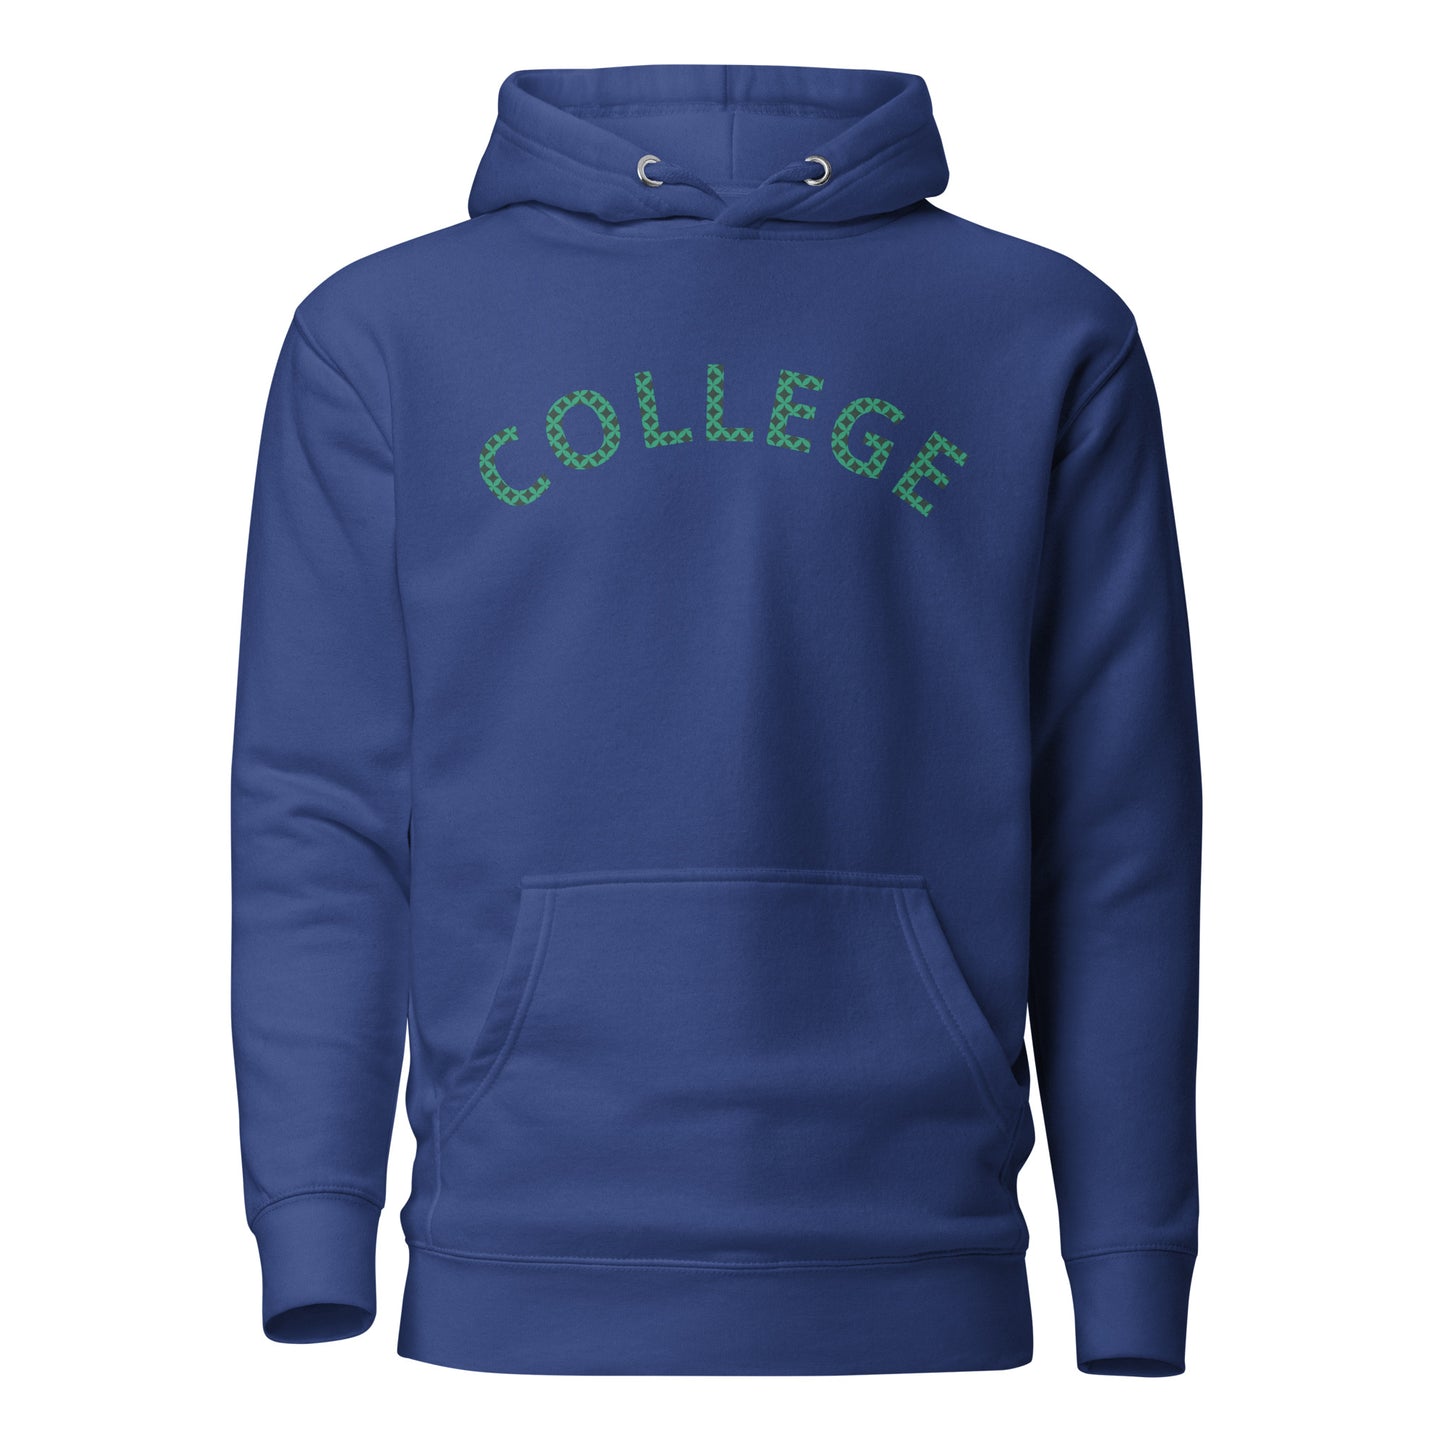 Royal Blue Sweatshirt that says 'College' across the chest 